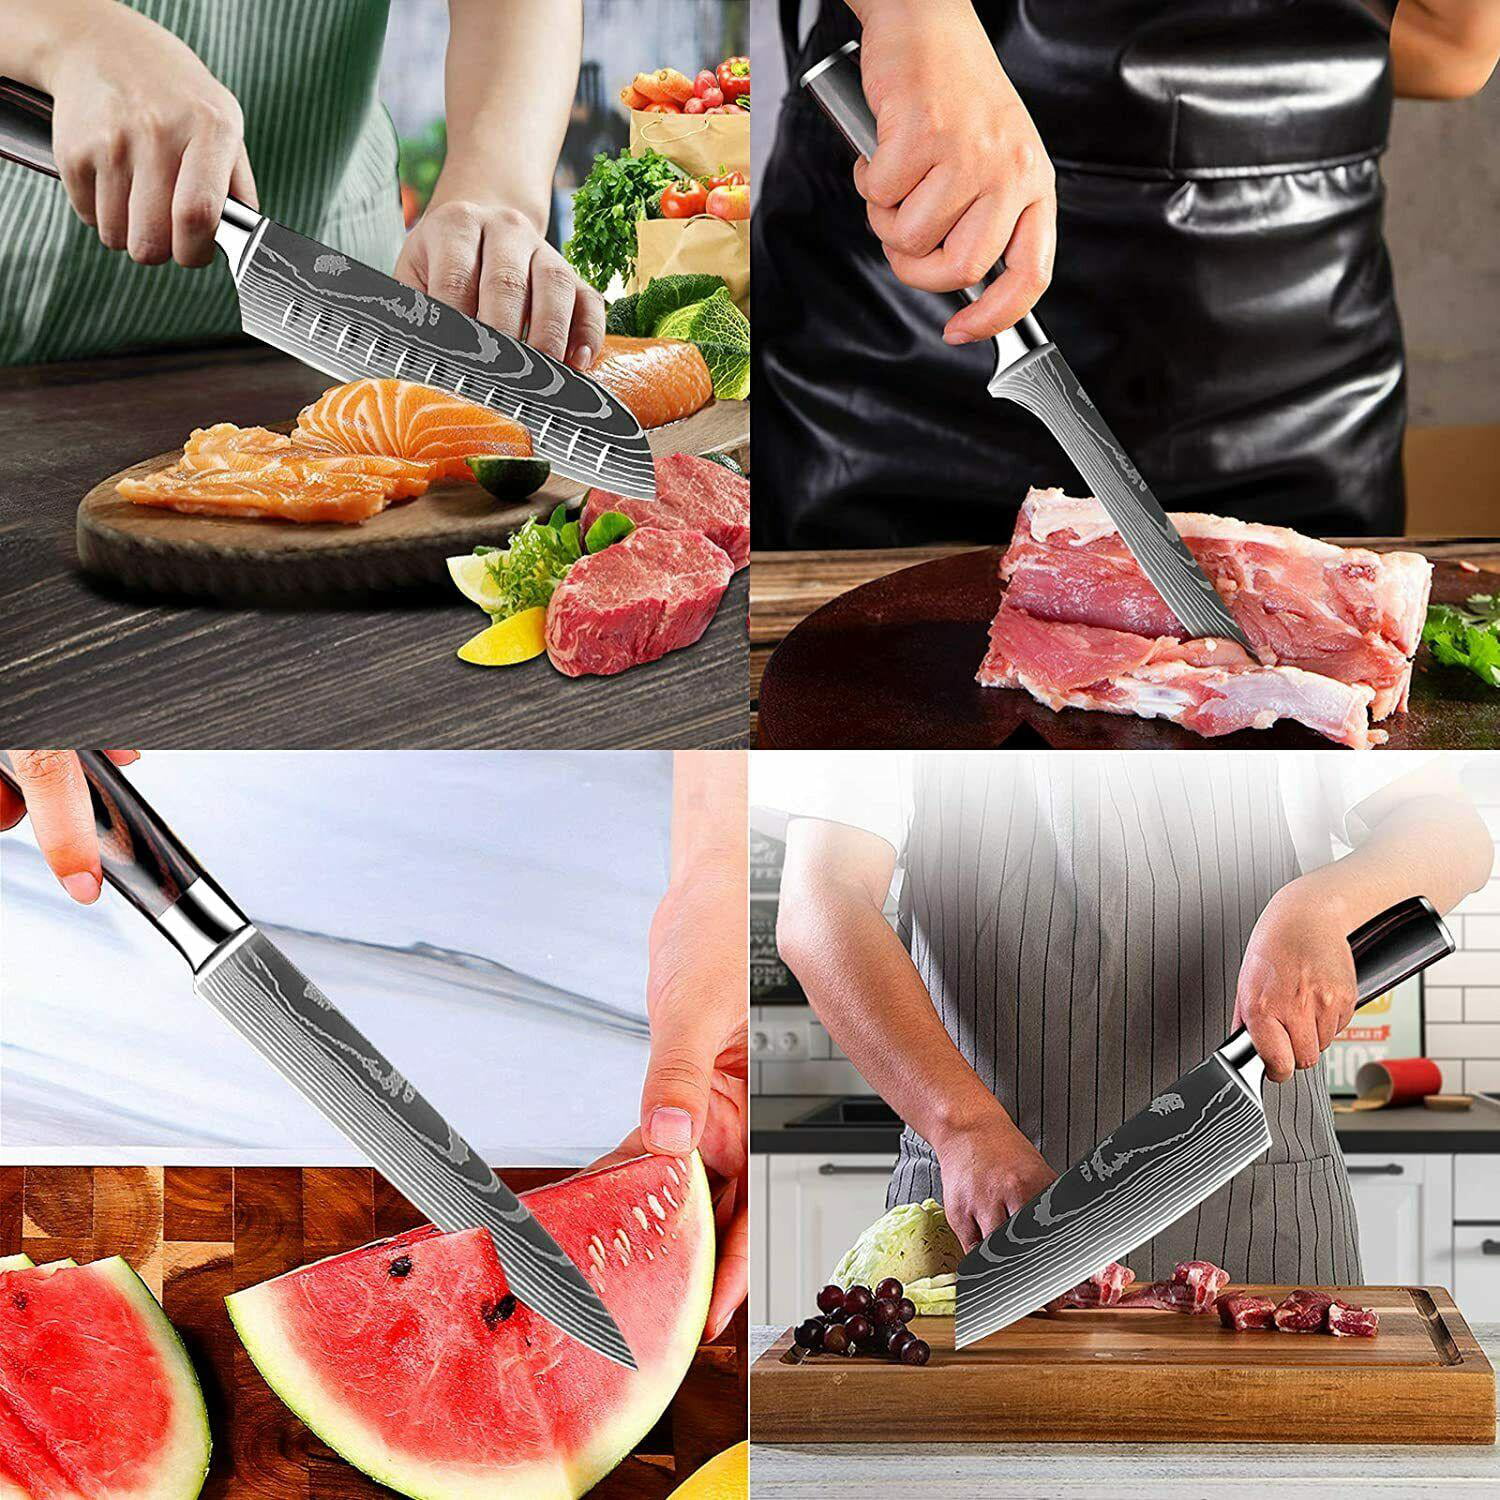 hedley & bennett Chef's Knife - 8” Japanese Kitchen Knife - Three Layer  Stainless Steel, Plain Sharp Edge - Perfect Cooking Gifts for Men and Women  